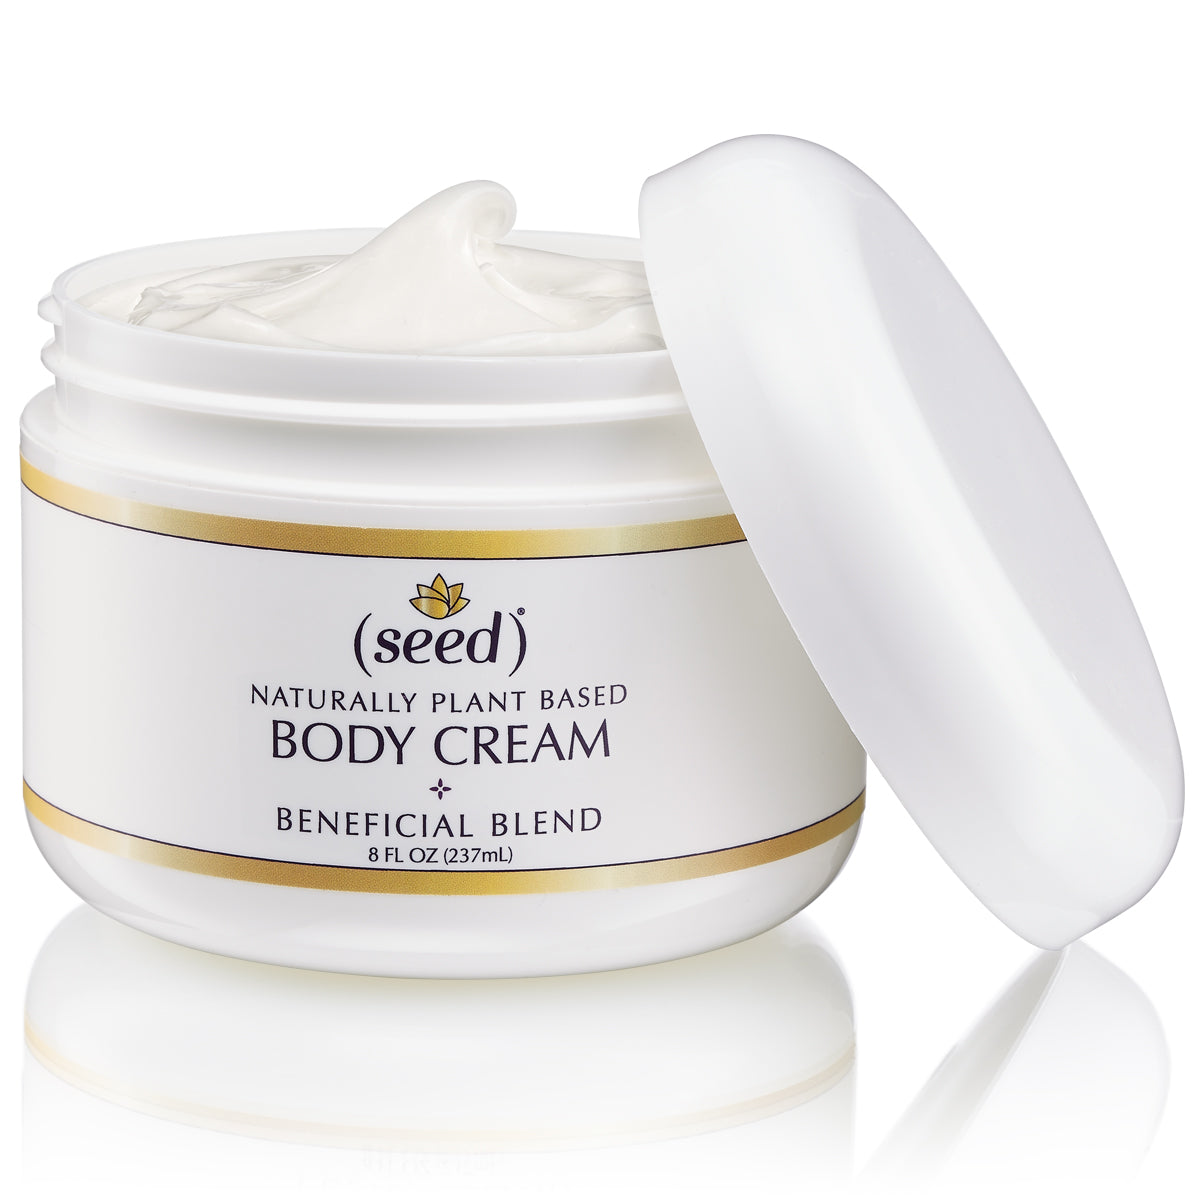 Seed Stress Relief Blend Body Cream features essential oils of lavender, clary sage, and patchouli